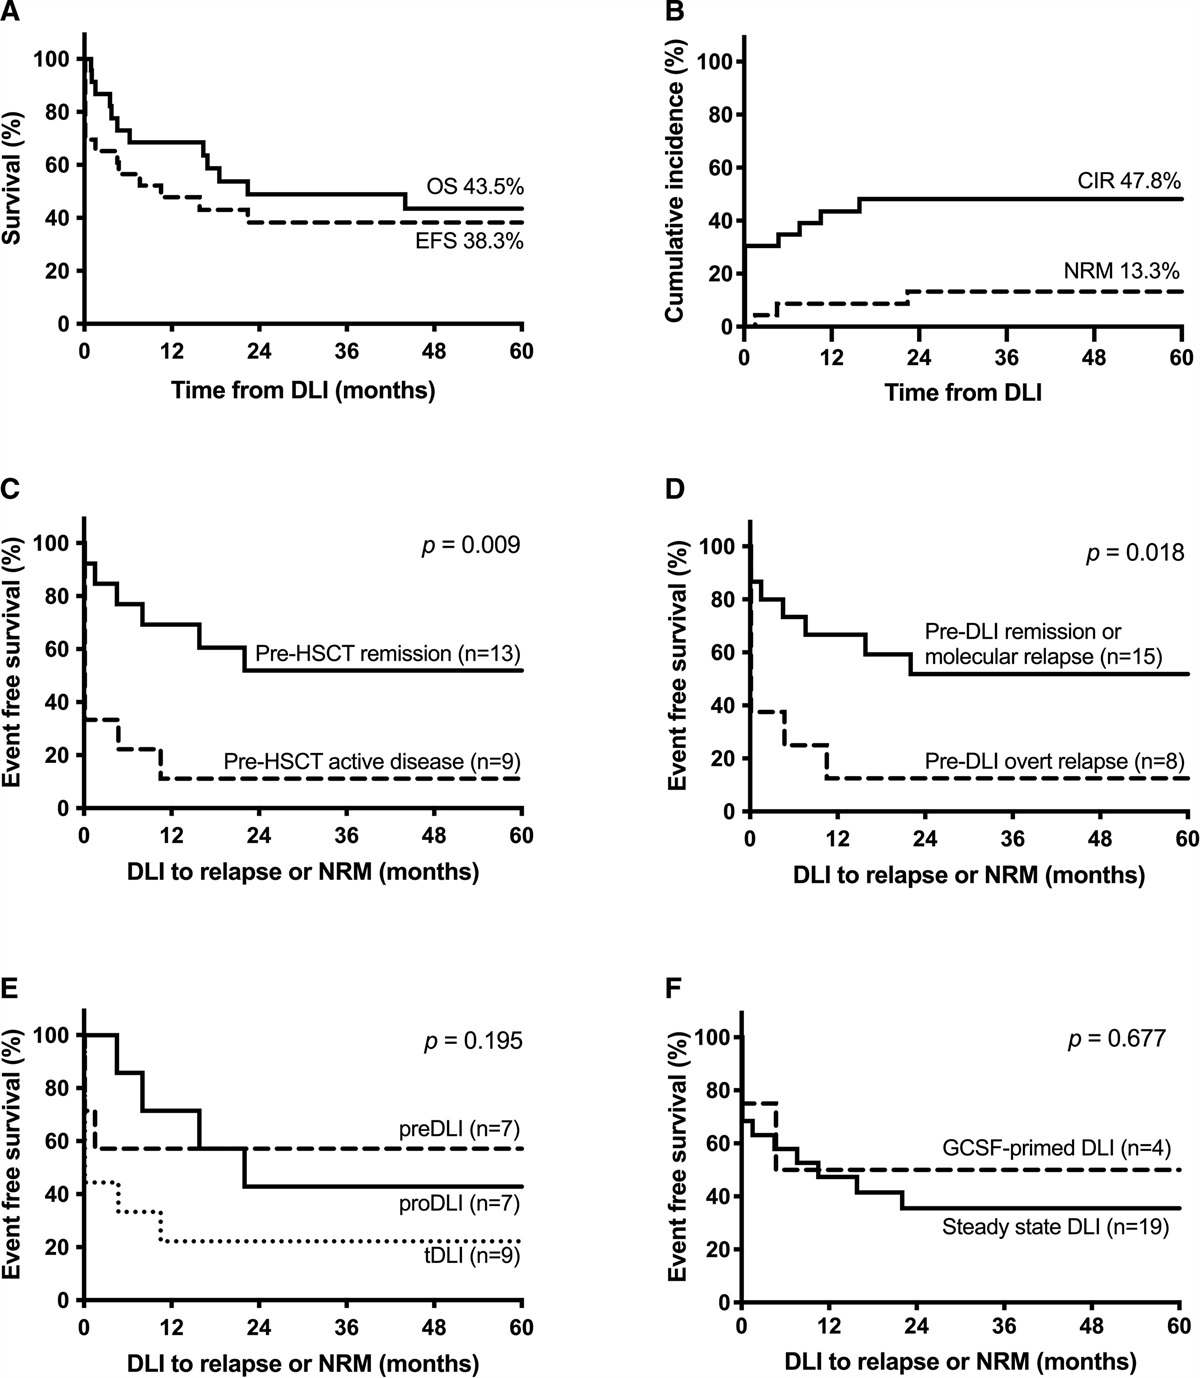 Donor lymphocyte infusion for prophylaxis and treatment of relapse in pediatric hematologic malignancies after allogeneic hematopoietic stem cell transplant